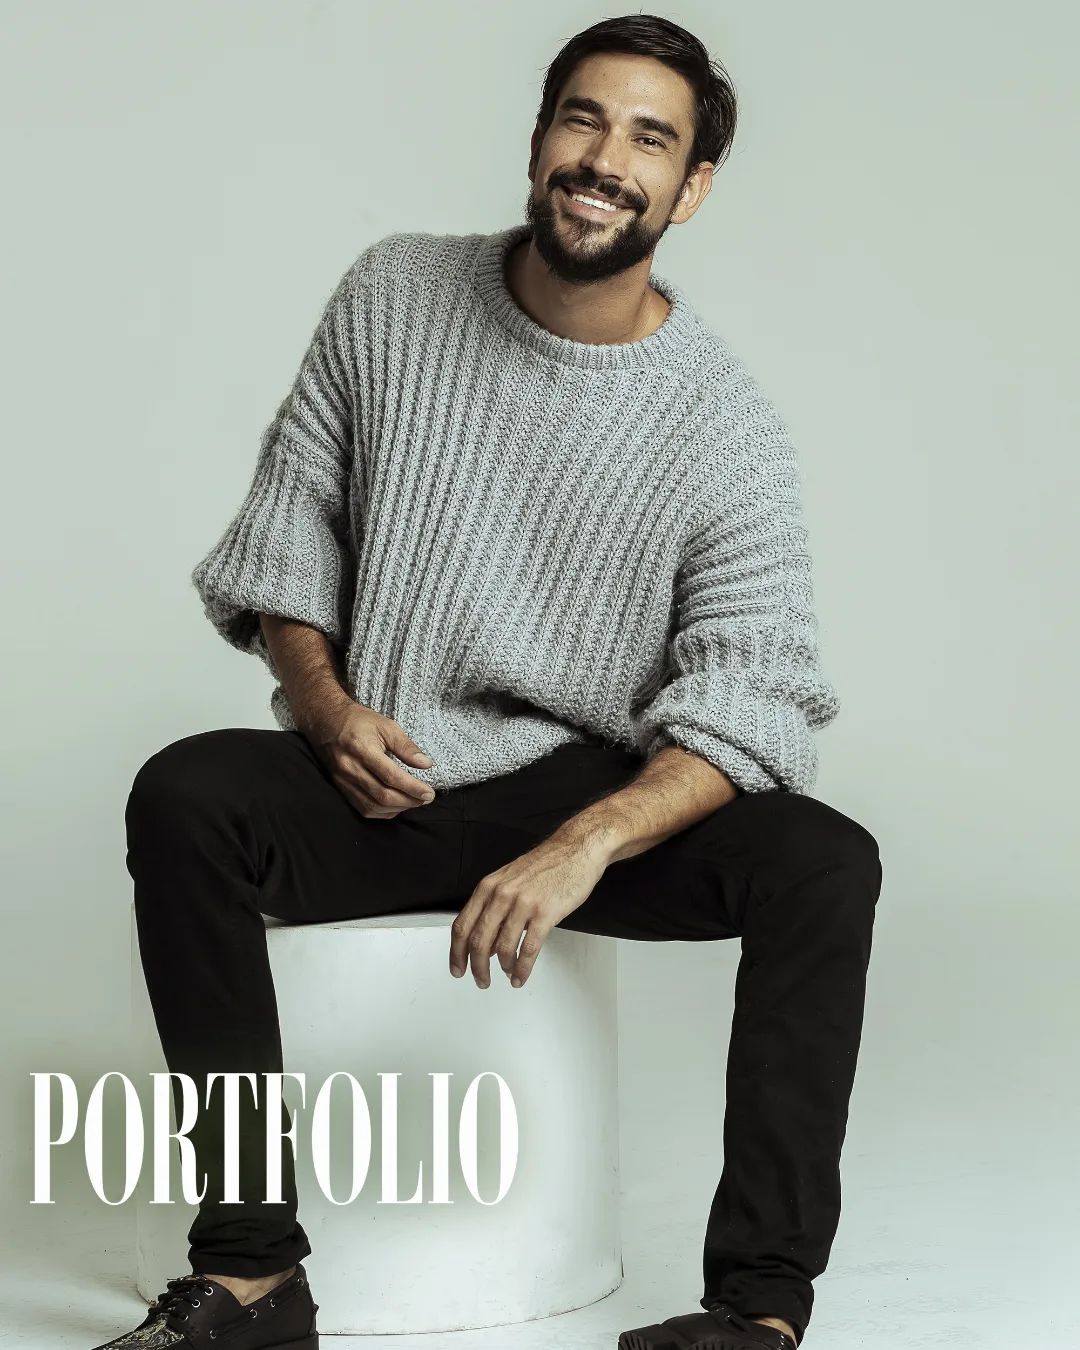 https://f.radikal.host/2023/04/06/Photo-by-REVISTA-PORTFOLIO-BRAZIL-on-March-19-2023.-May-be-an-image-of-1-person-beard-standing-and-text-that-says-PORTFOLIO.-1.jpg